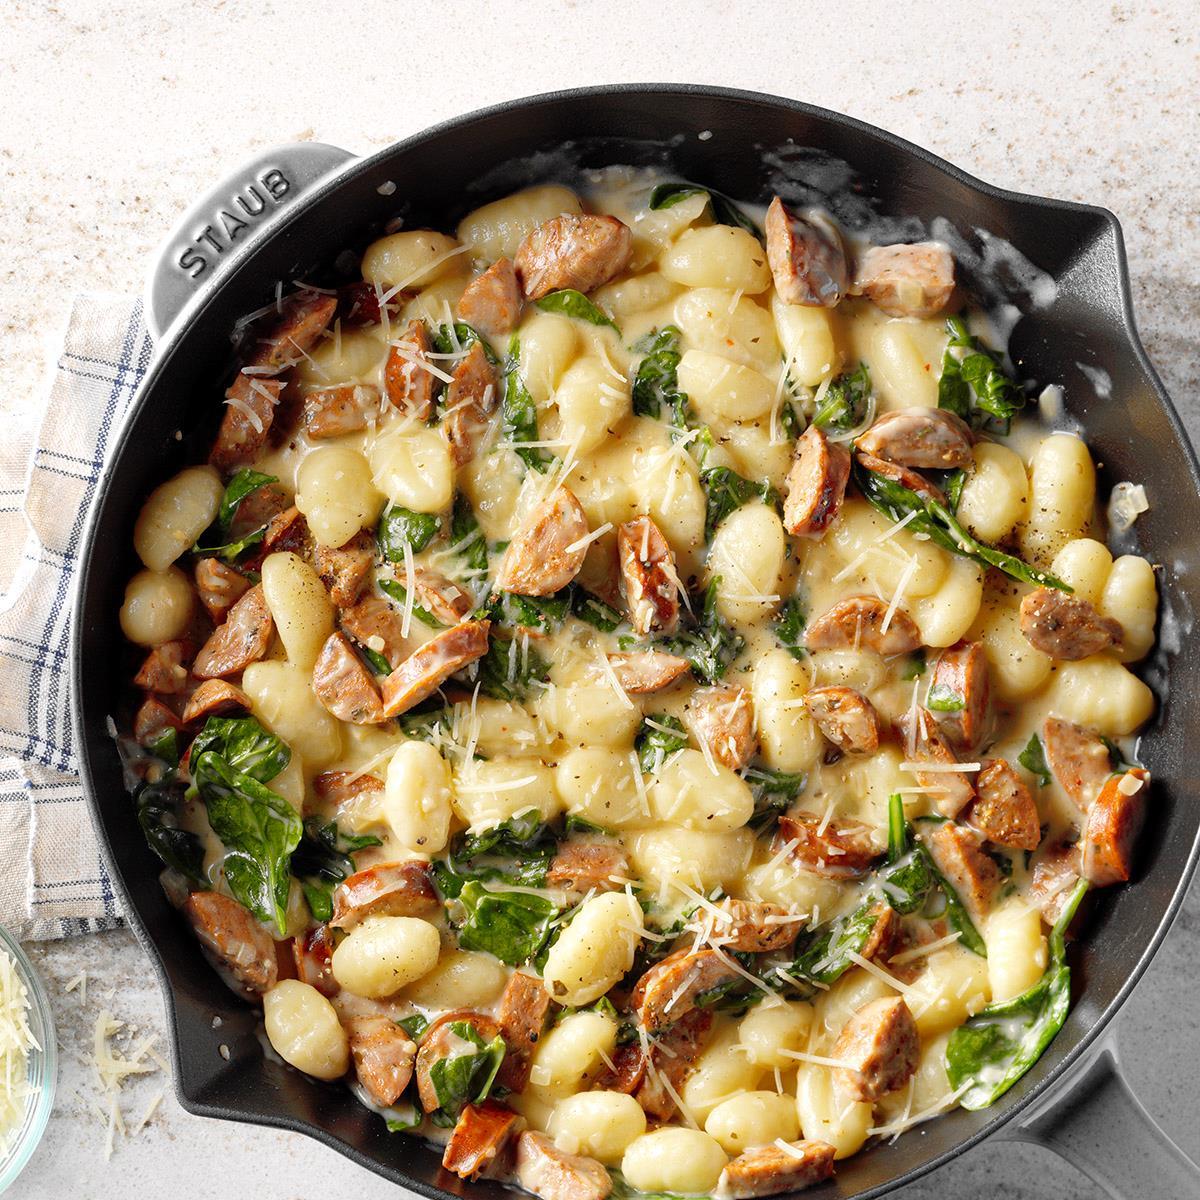 Gnocchi with Spinach and Chicken Sausage Recipe: How to Make It